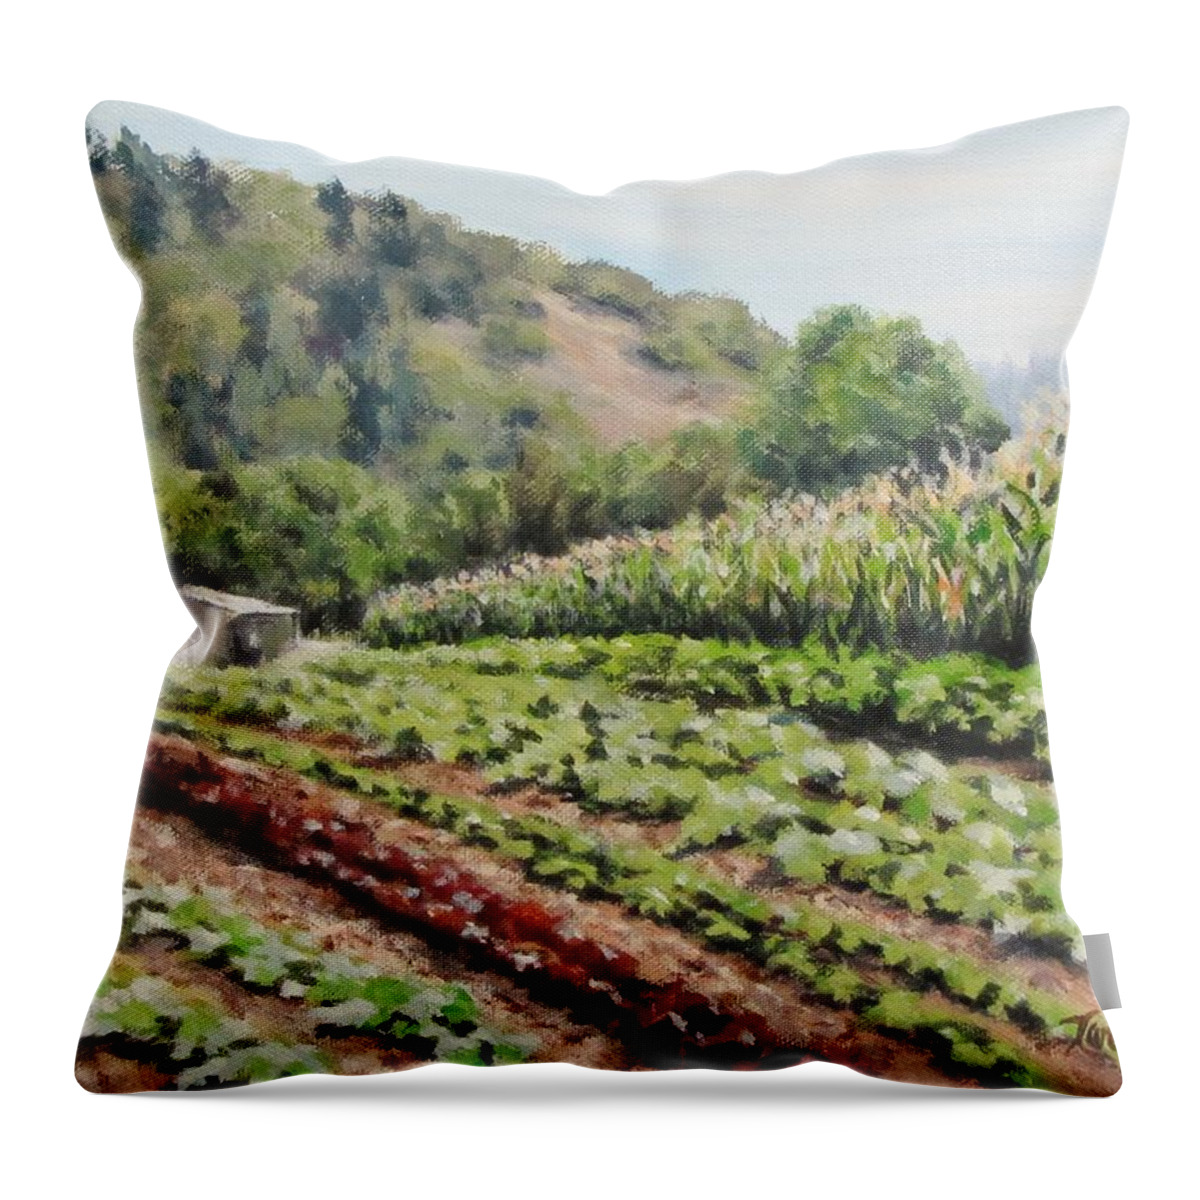 Original Throw Pillow featuring the painting All In a Row by Karen Ilari